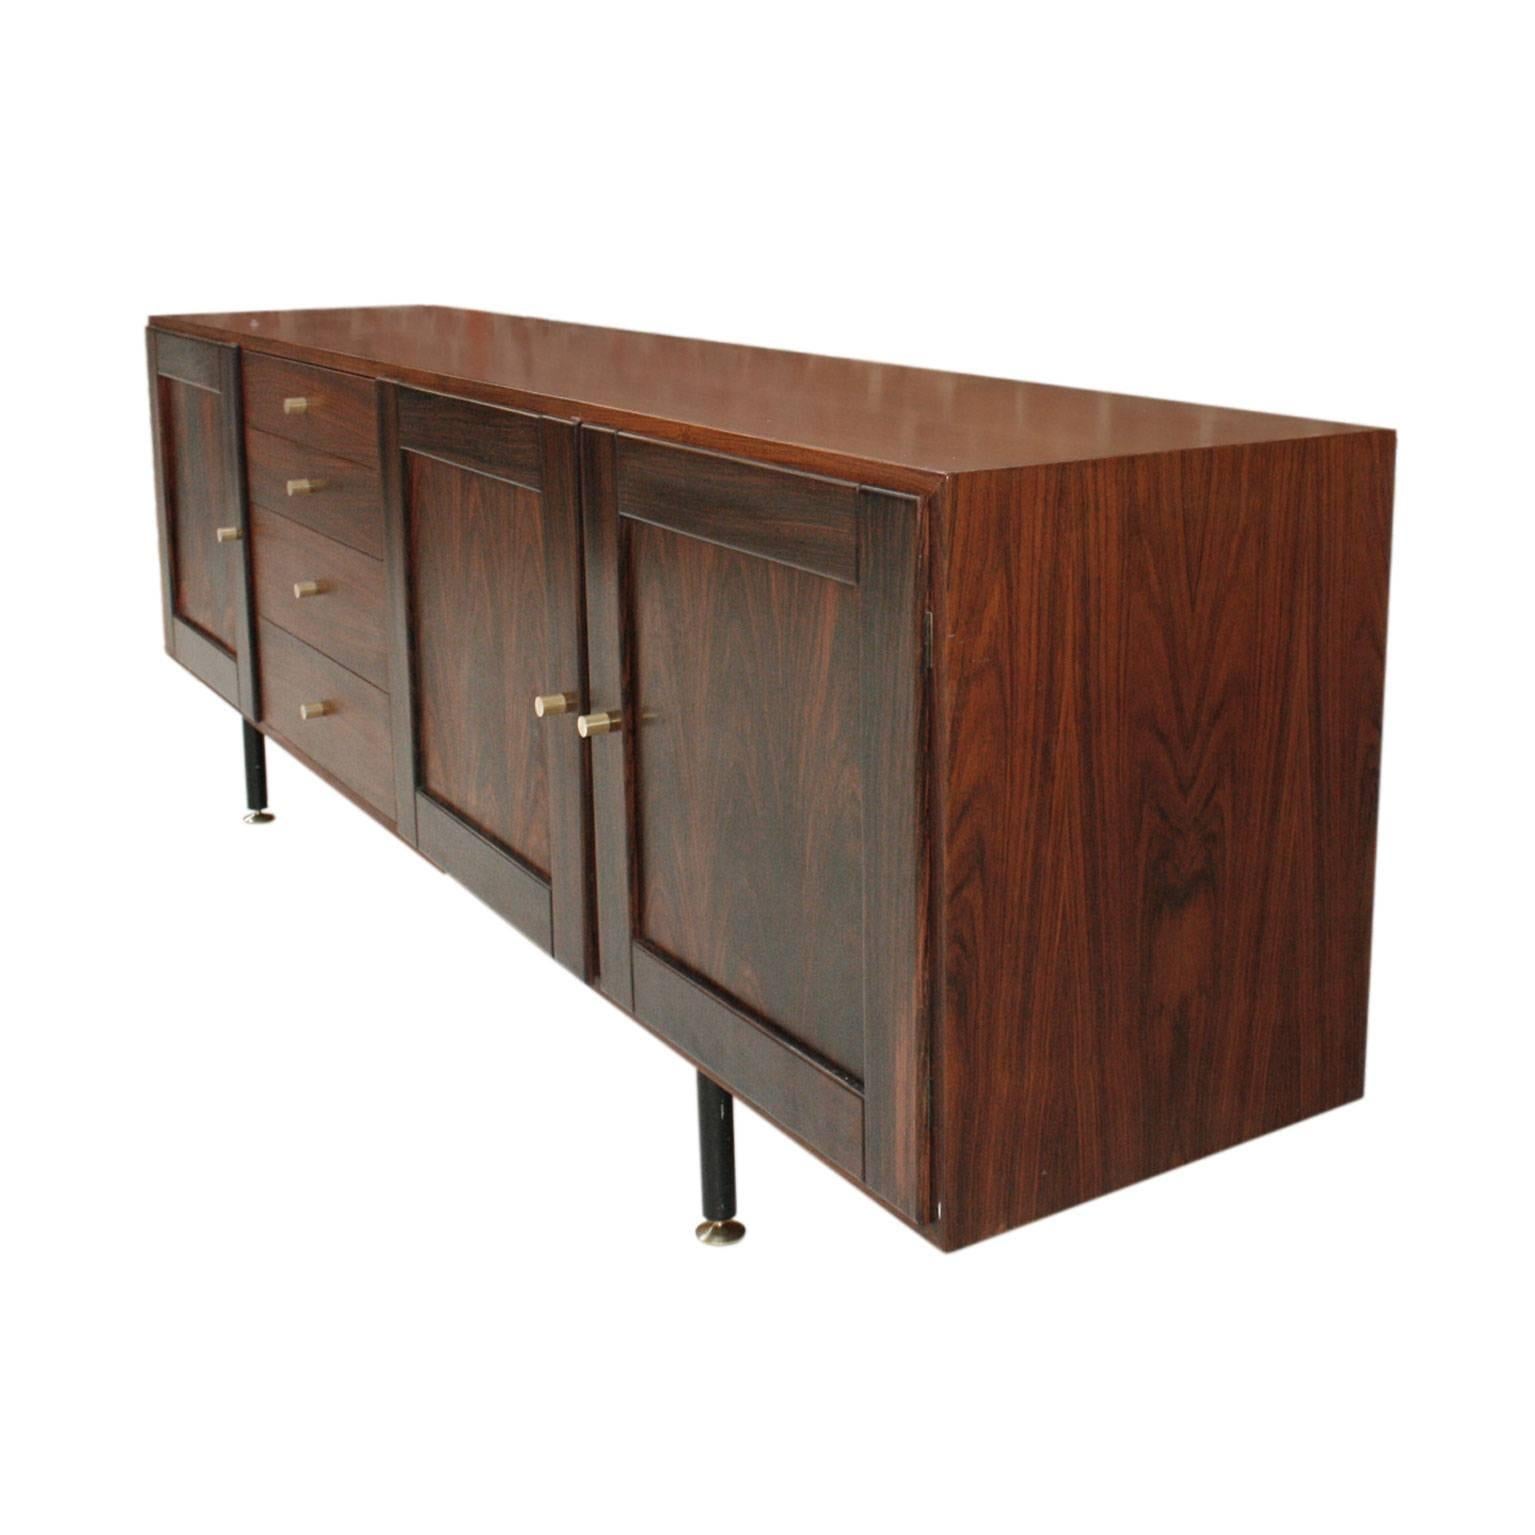 Sideboard made of solid wood covered with rosewood, structured in four bodies of doors and drawers. Metal legs with brass terminations.